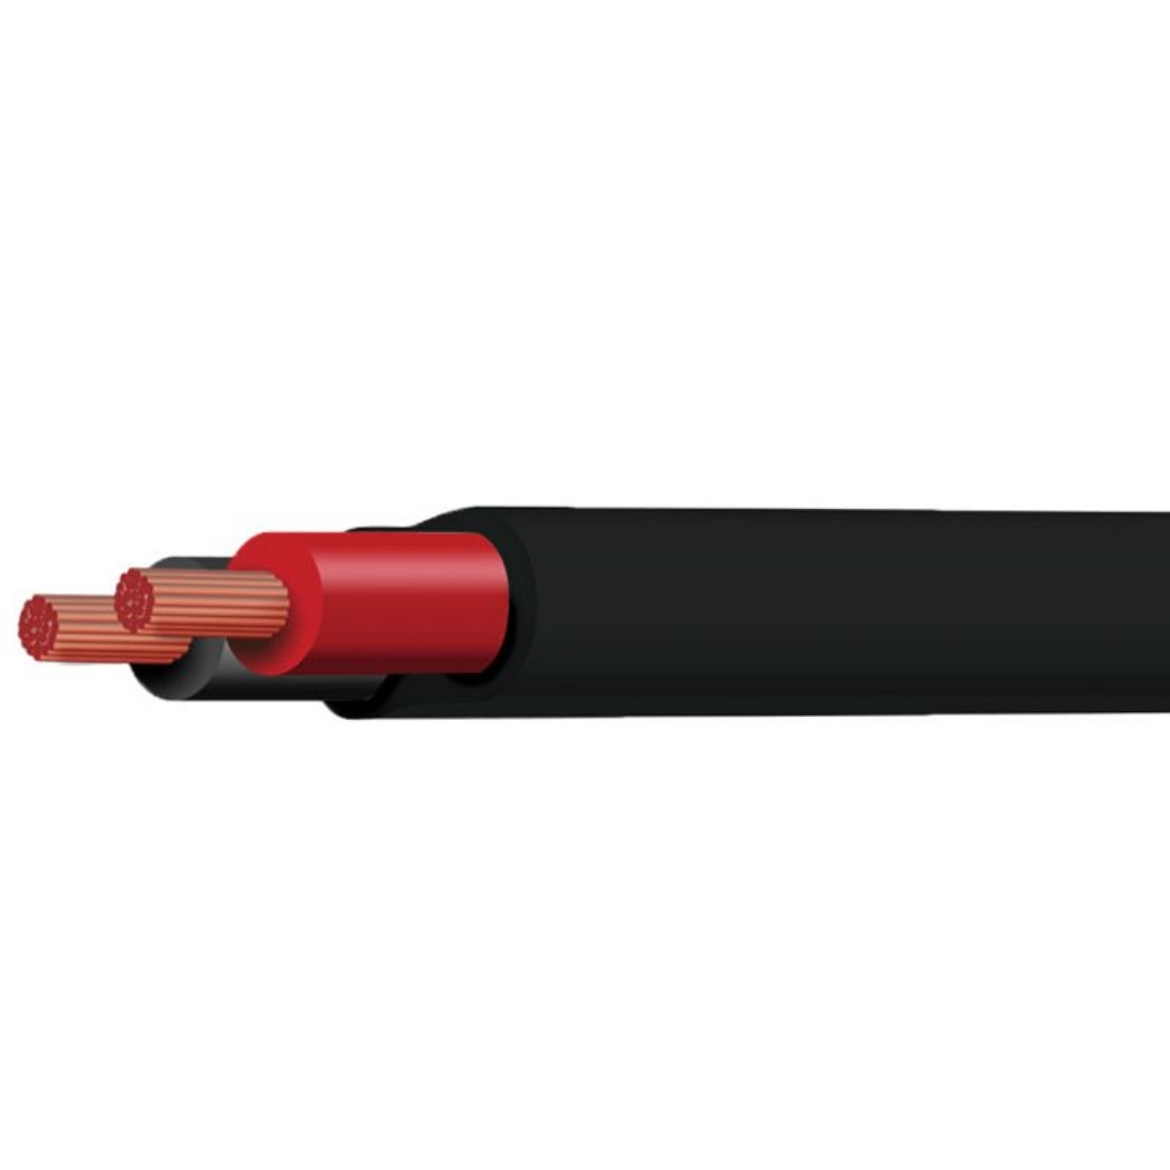 Picture of TYCAB 6MM TWIN CORE CABLE 38A TWIN SHEATH BLACK/RED - 30M ROLL